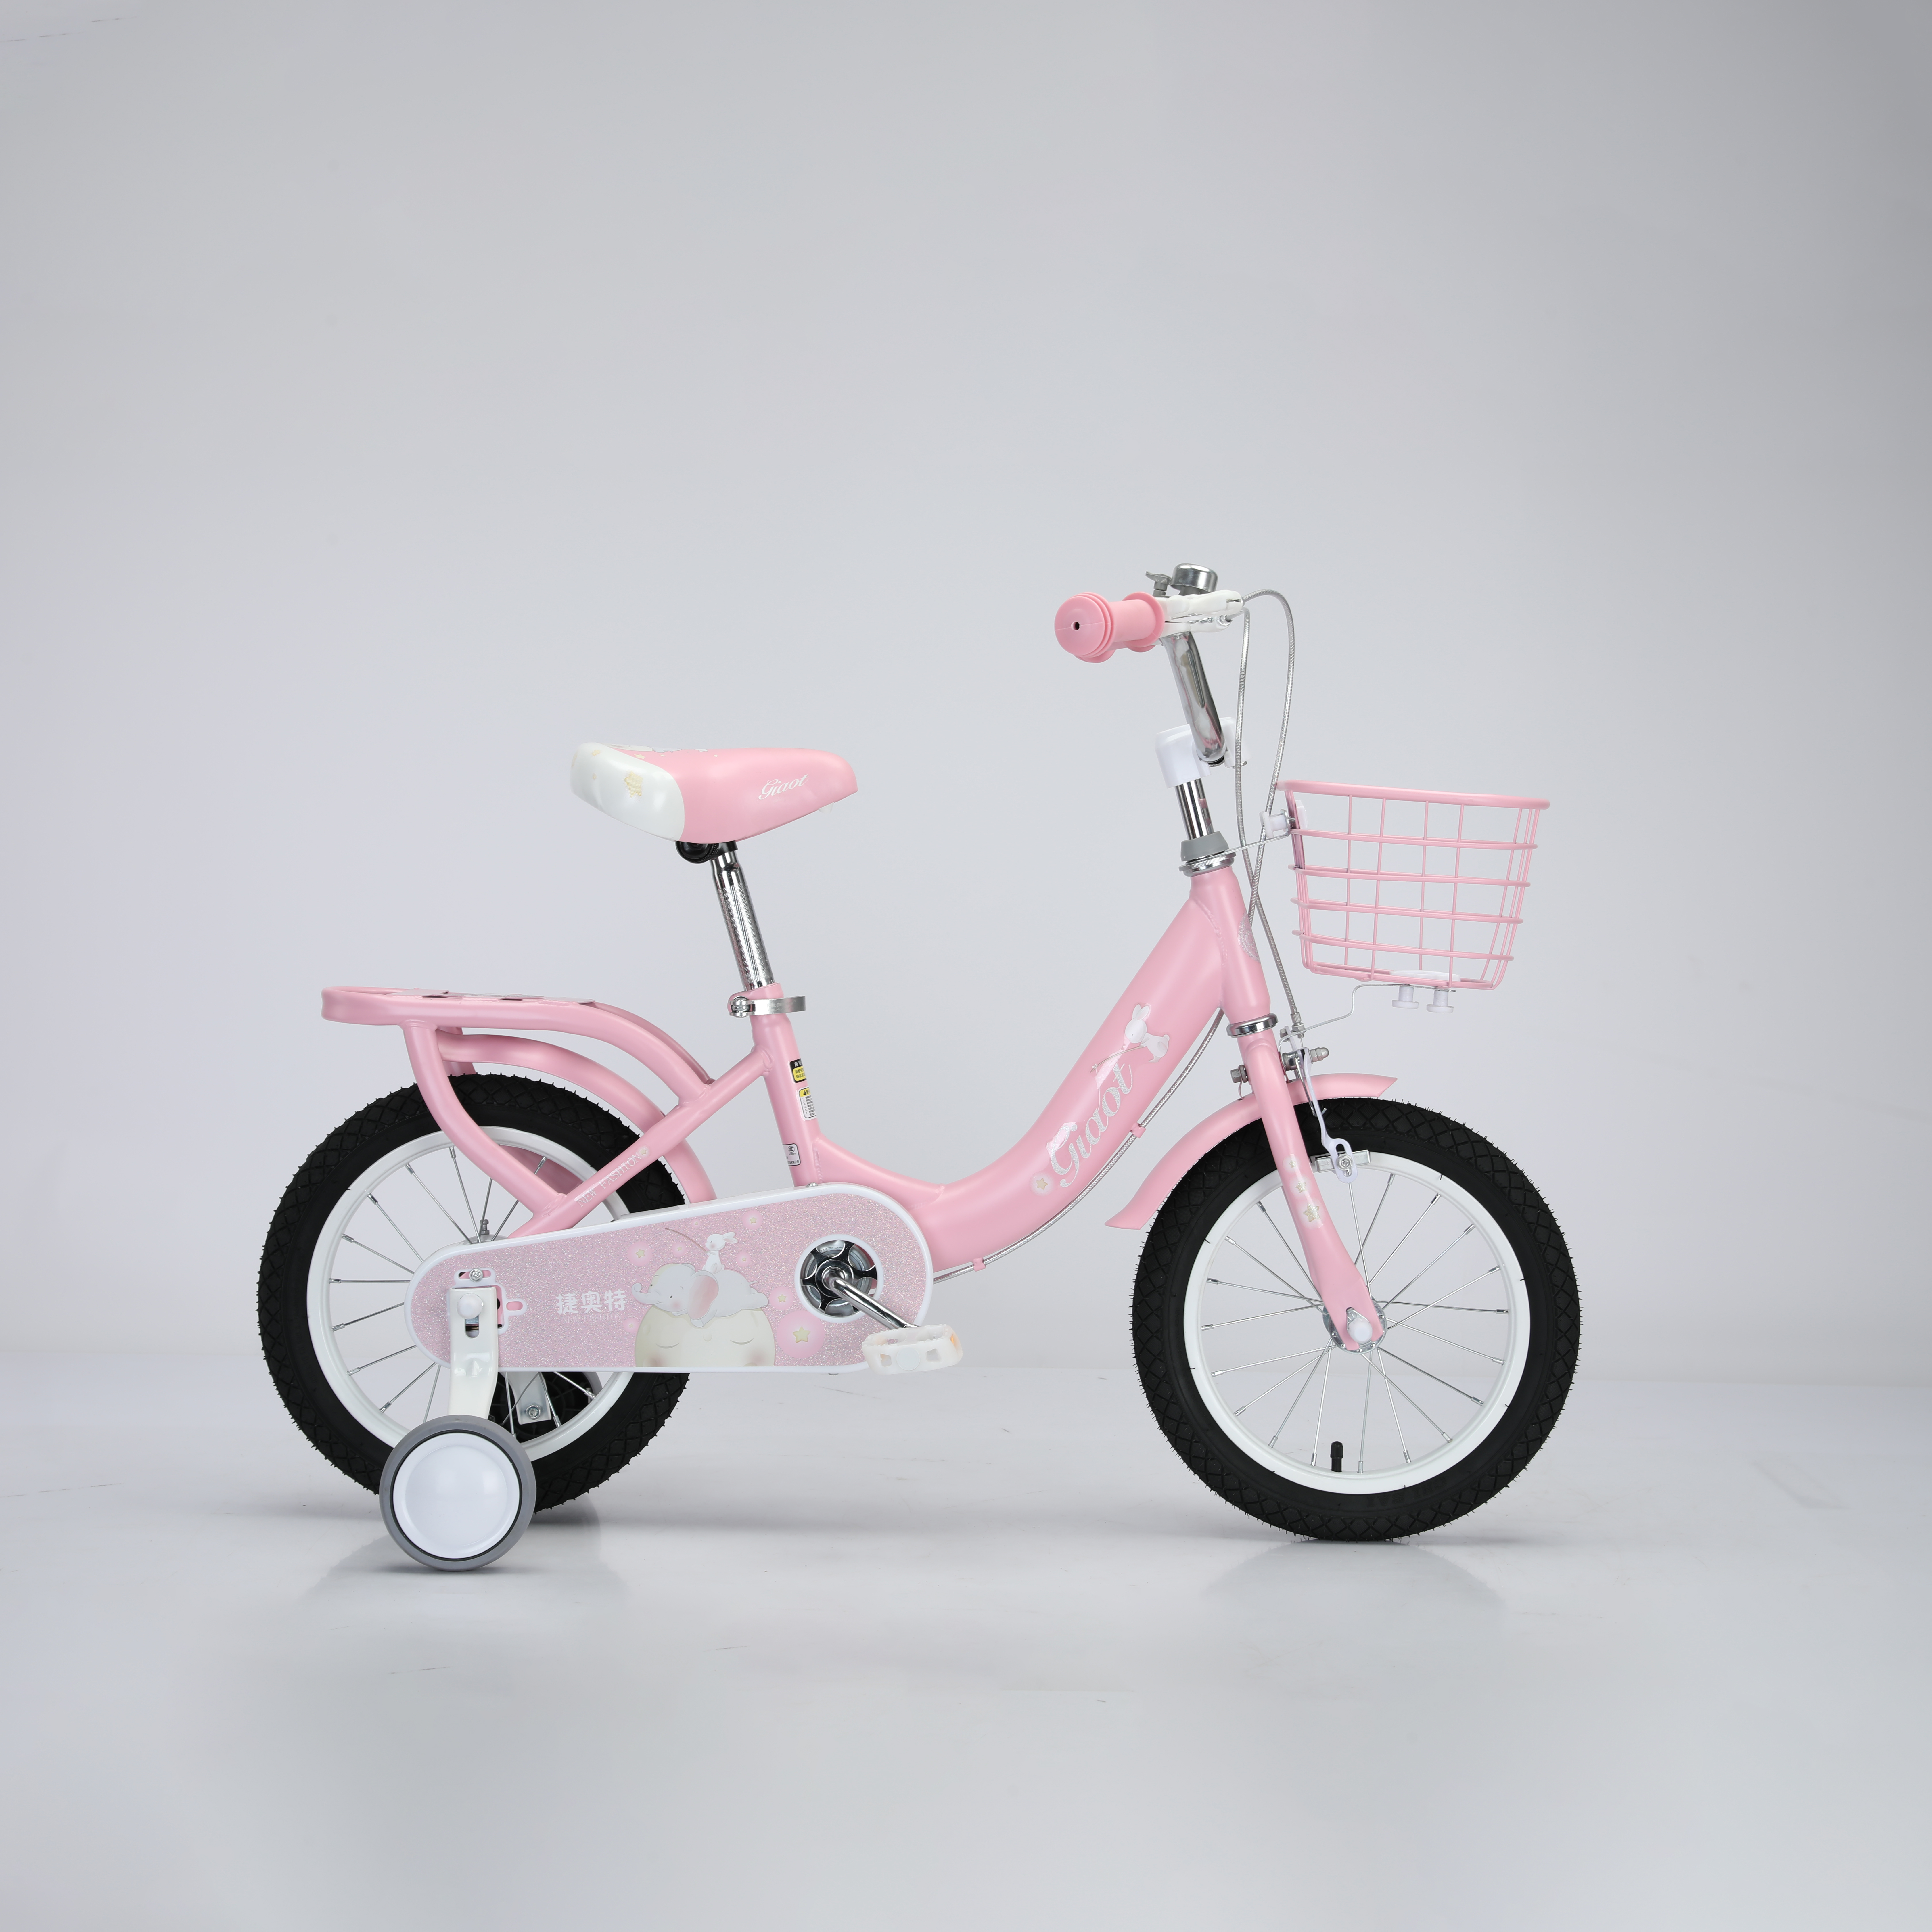 Introducing the Premium Kids Bike from Hebei Giaot!